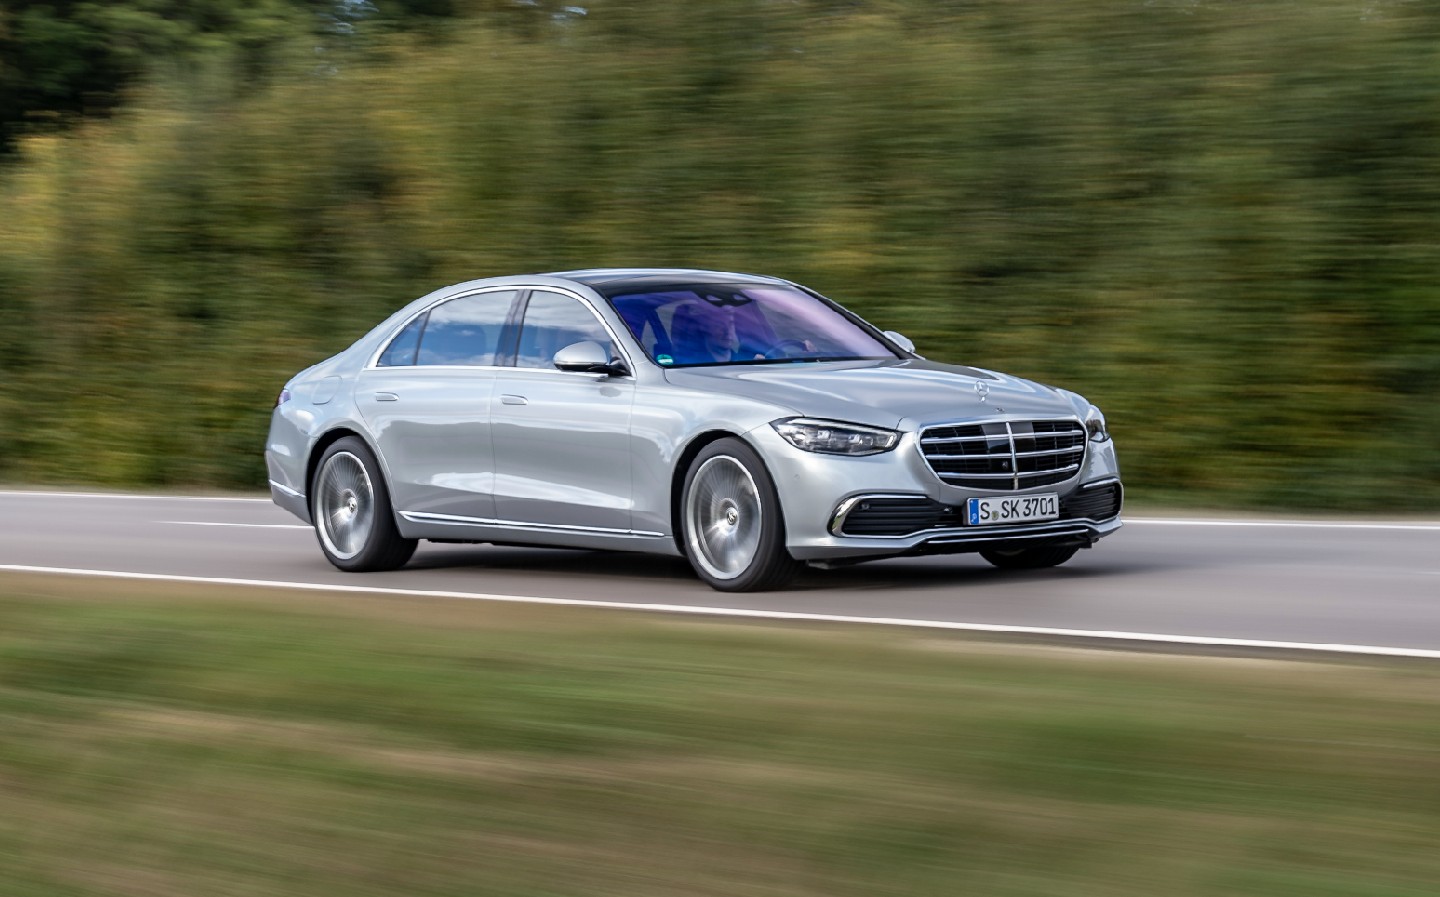 Mercedes-Benz S-Class 2021 review by Will Dron for Sunday Times Driving.co.uk